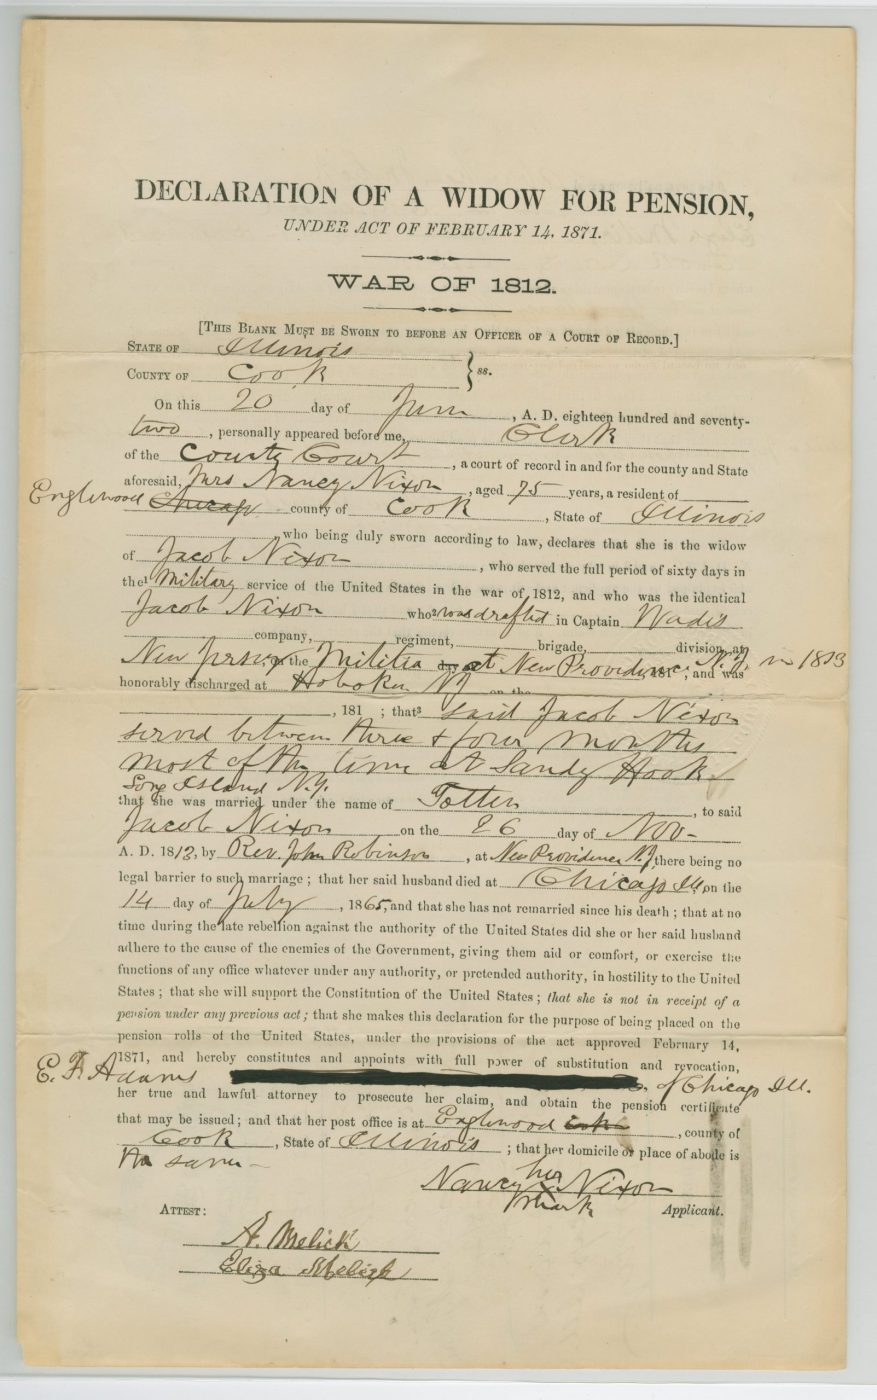 Pension application submitted in 1872 by widow of War of 1812 Veteran who died in 1865. (National Archives)